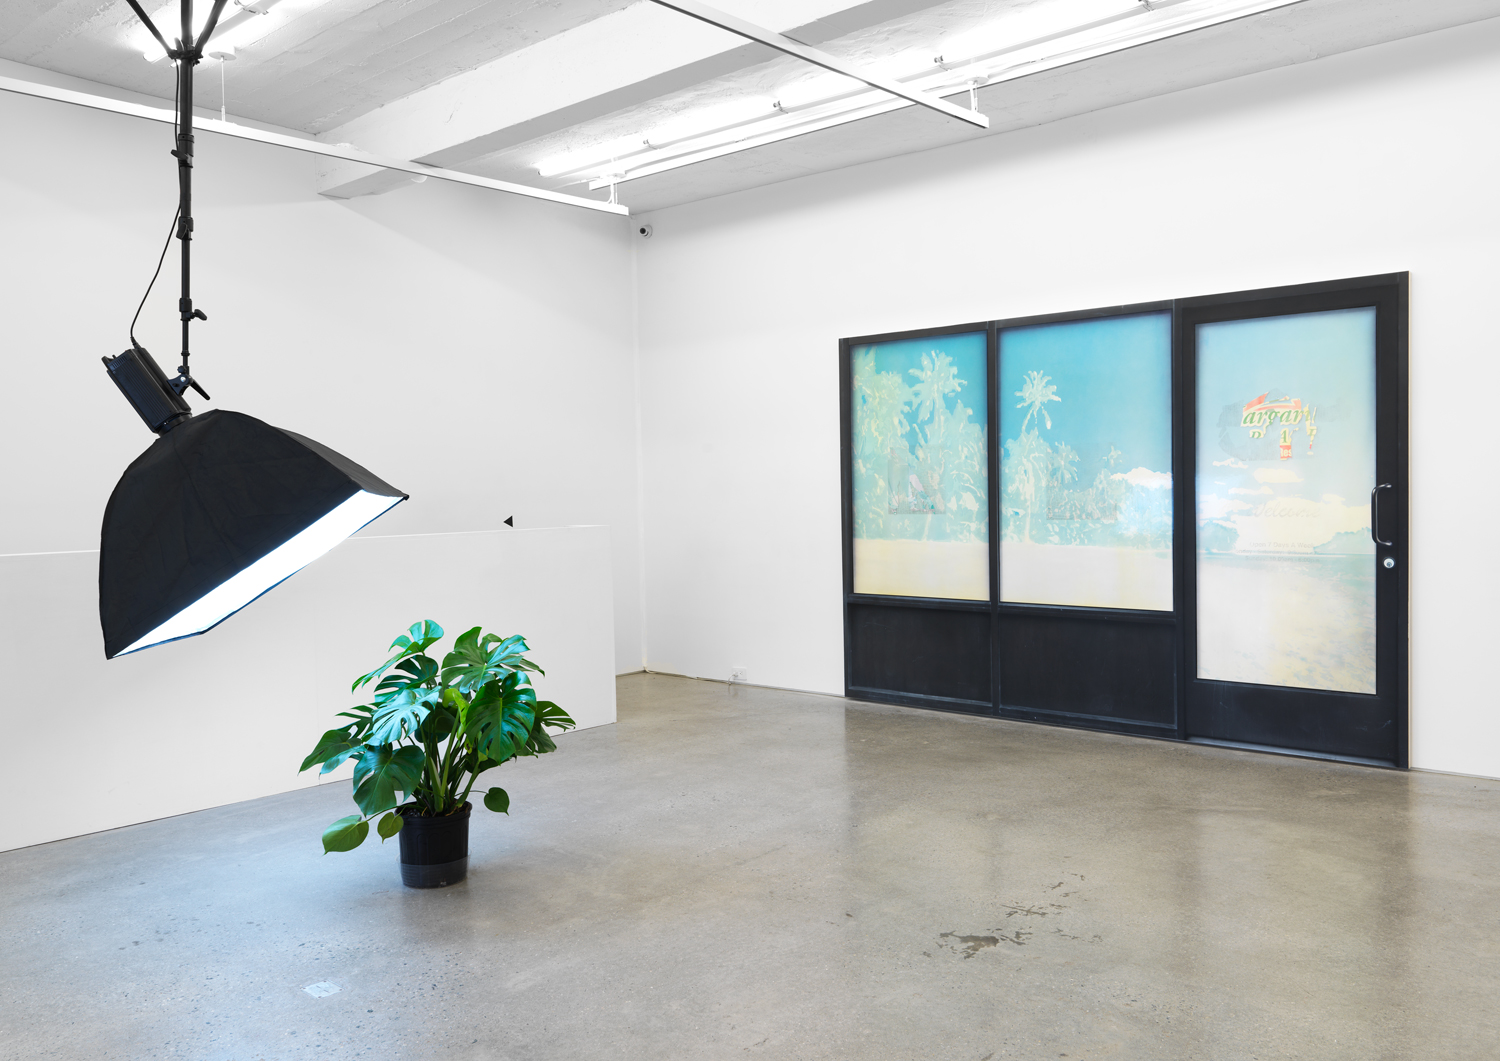 Kerry Tribe, Ceiling Light (Monstera deliciosa) (left), 2018, modified lighting equipment and potted plant, dimensions variable